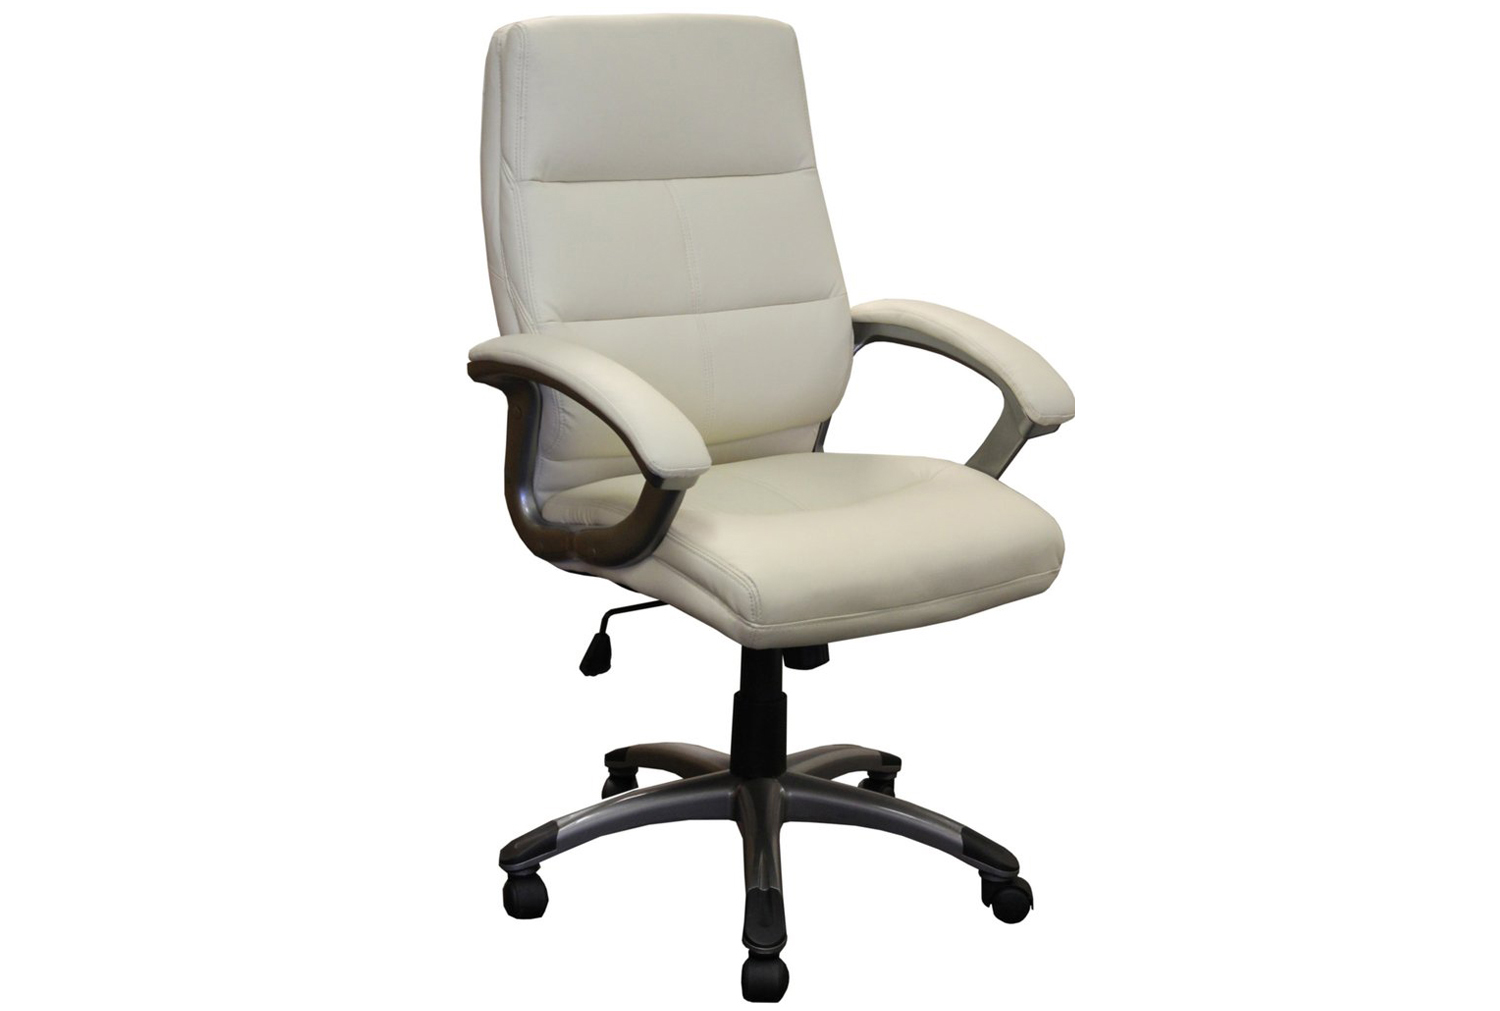 Telford Cream Executive Office Chair, Fully Installed